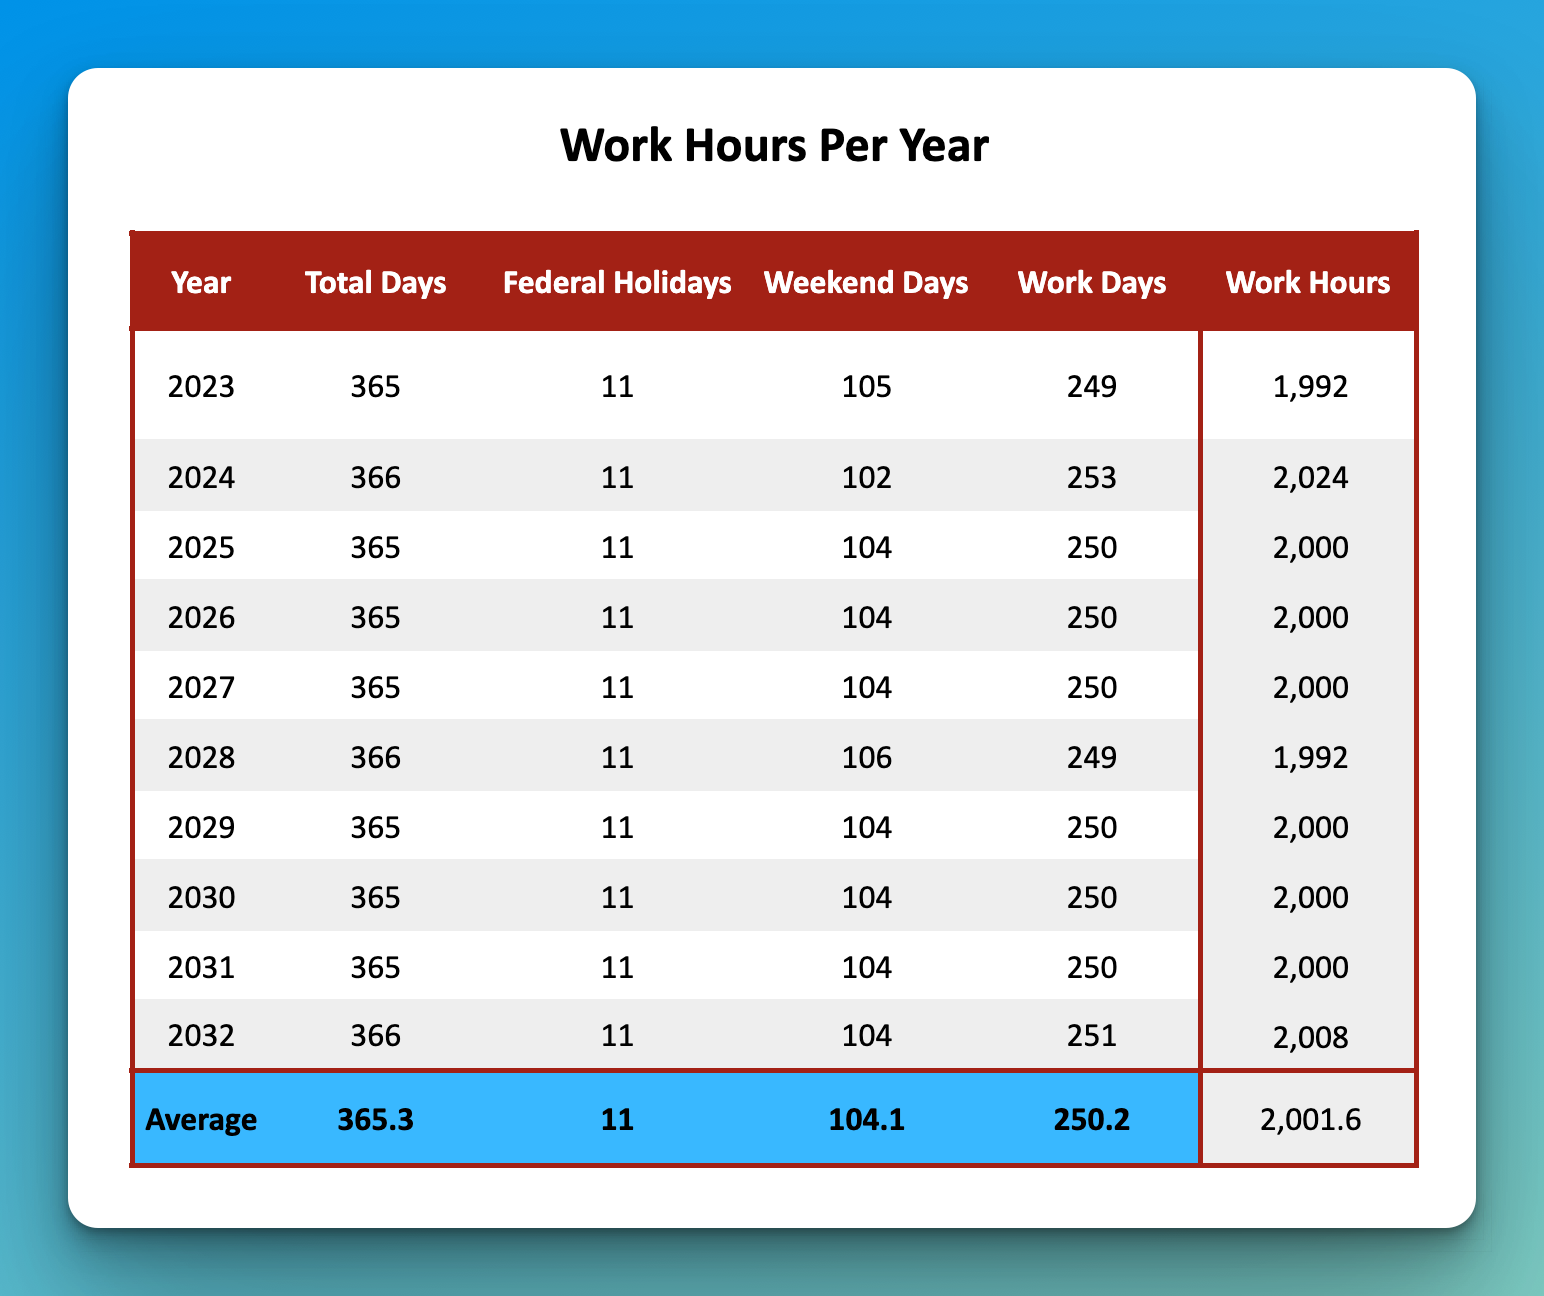 How Many Work Hours Are In A Year Buildremote